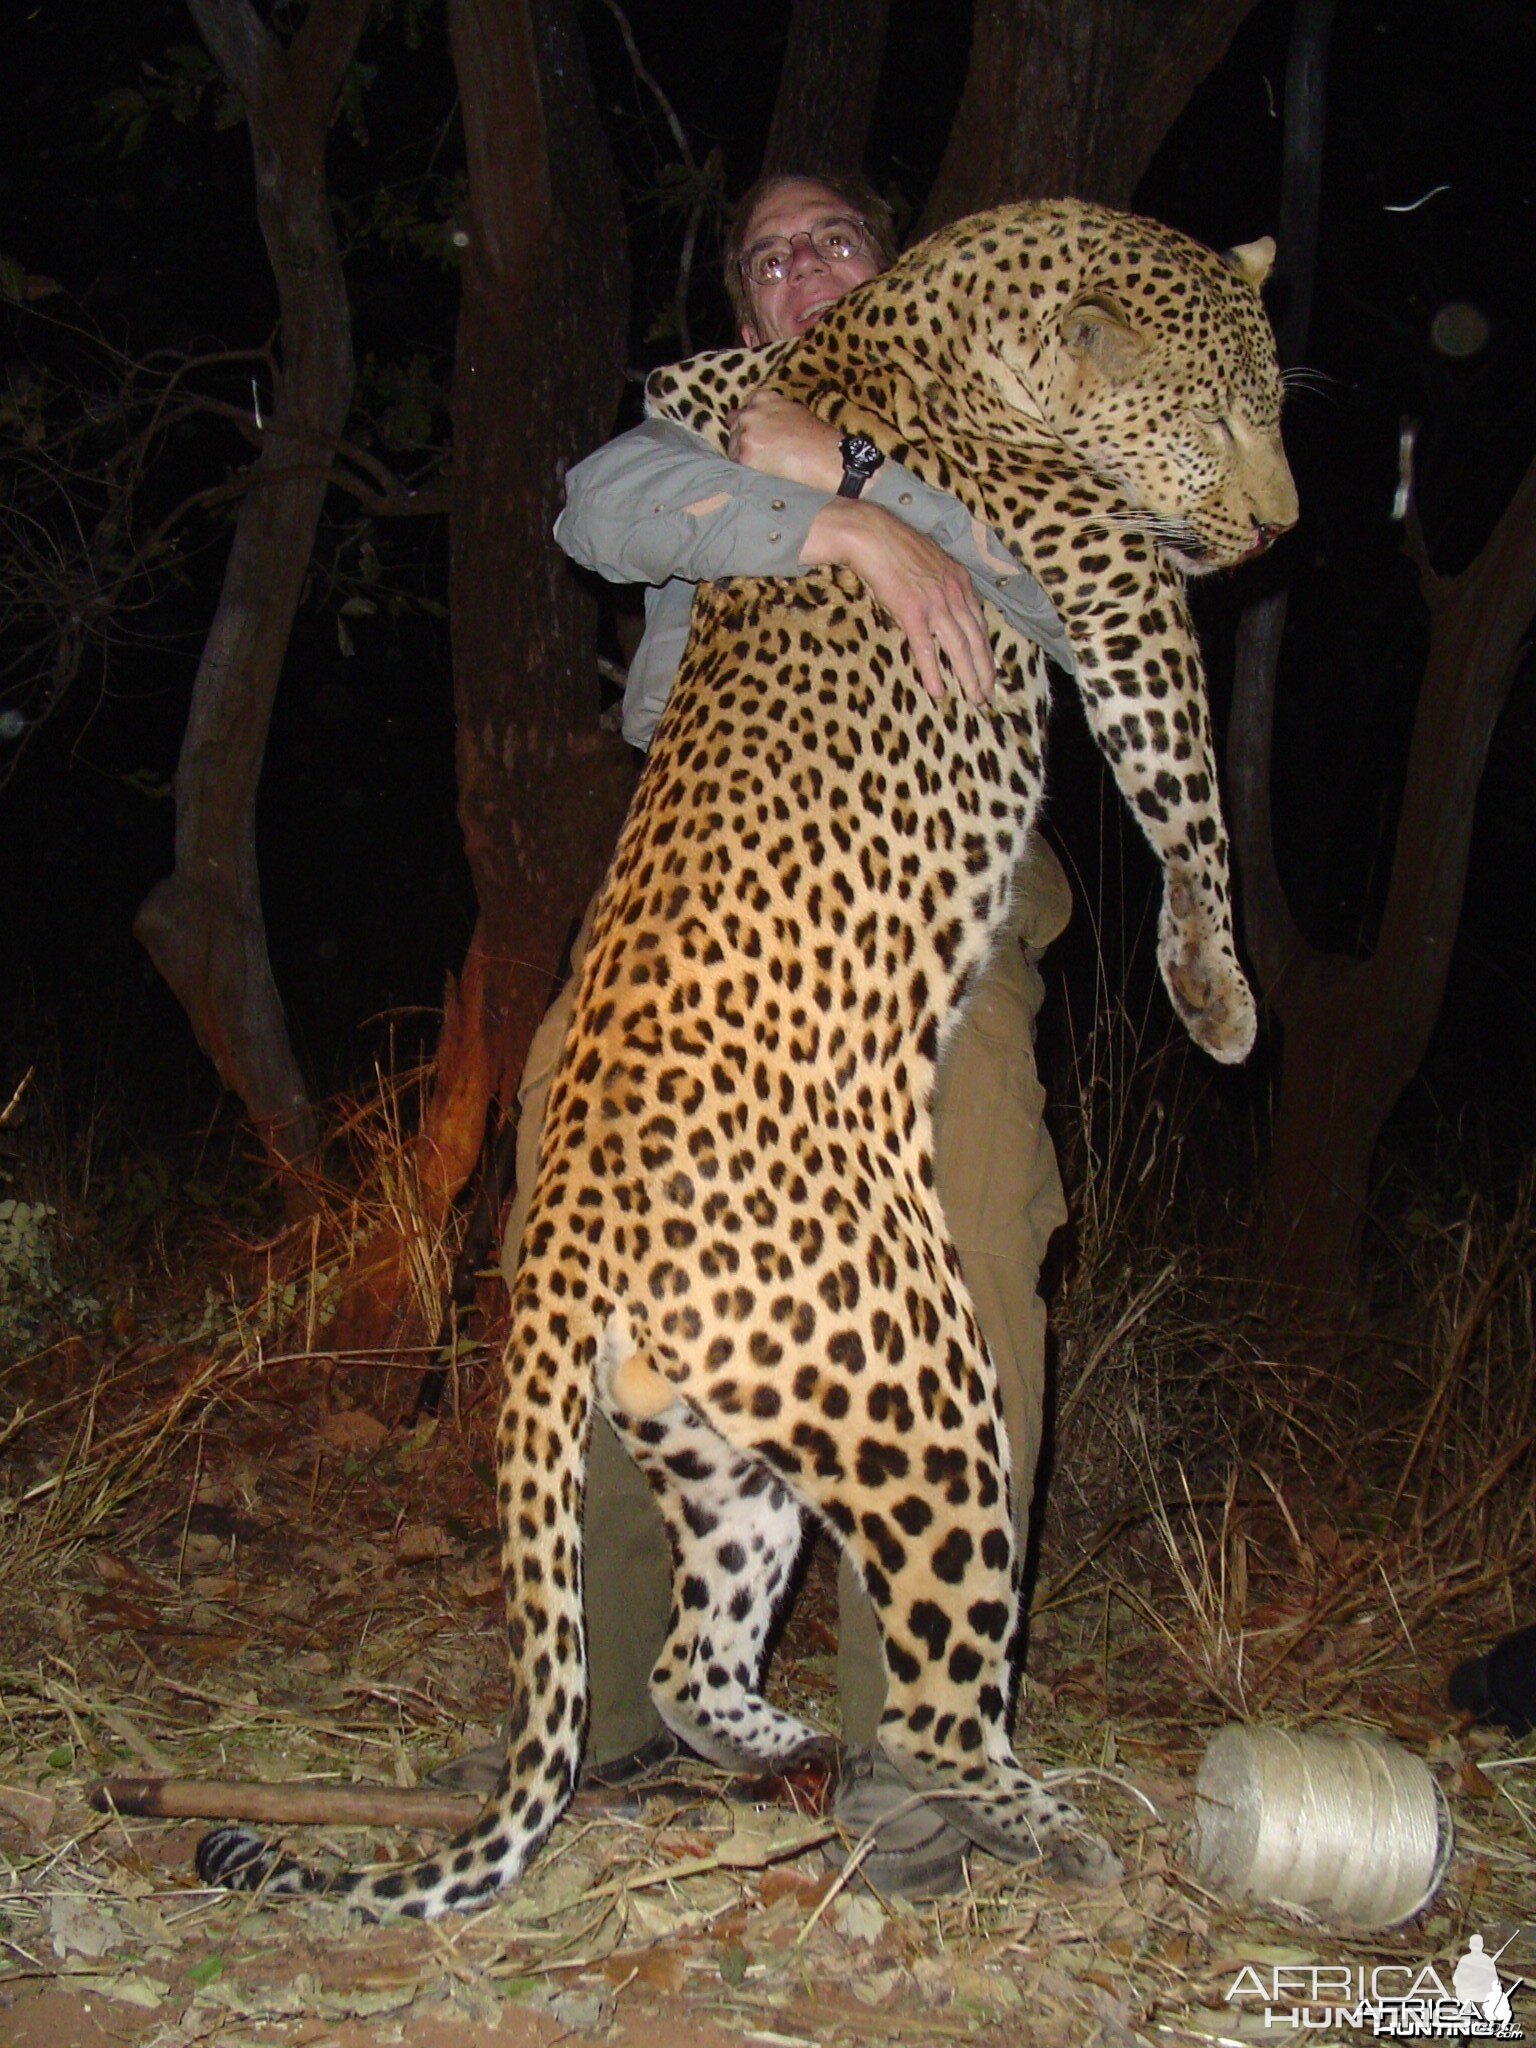 Monster Leopard hunted in Zambia with Prohunt Zambia